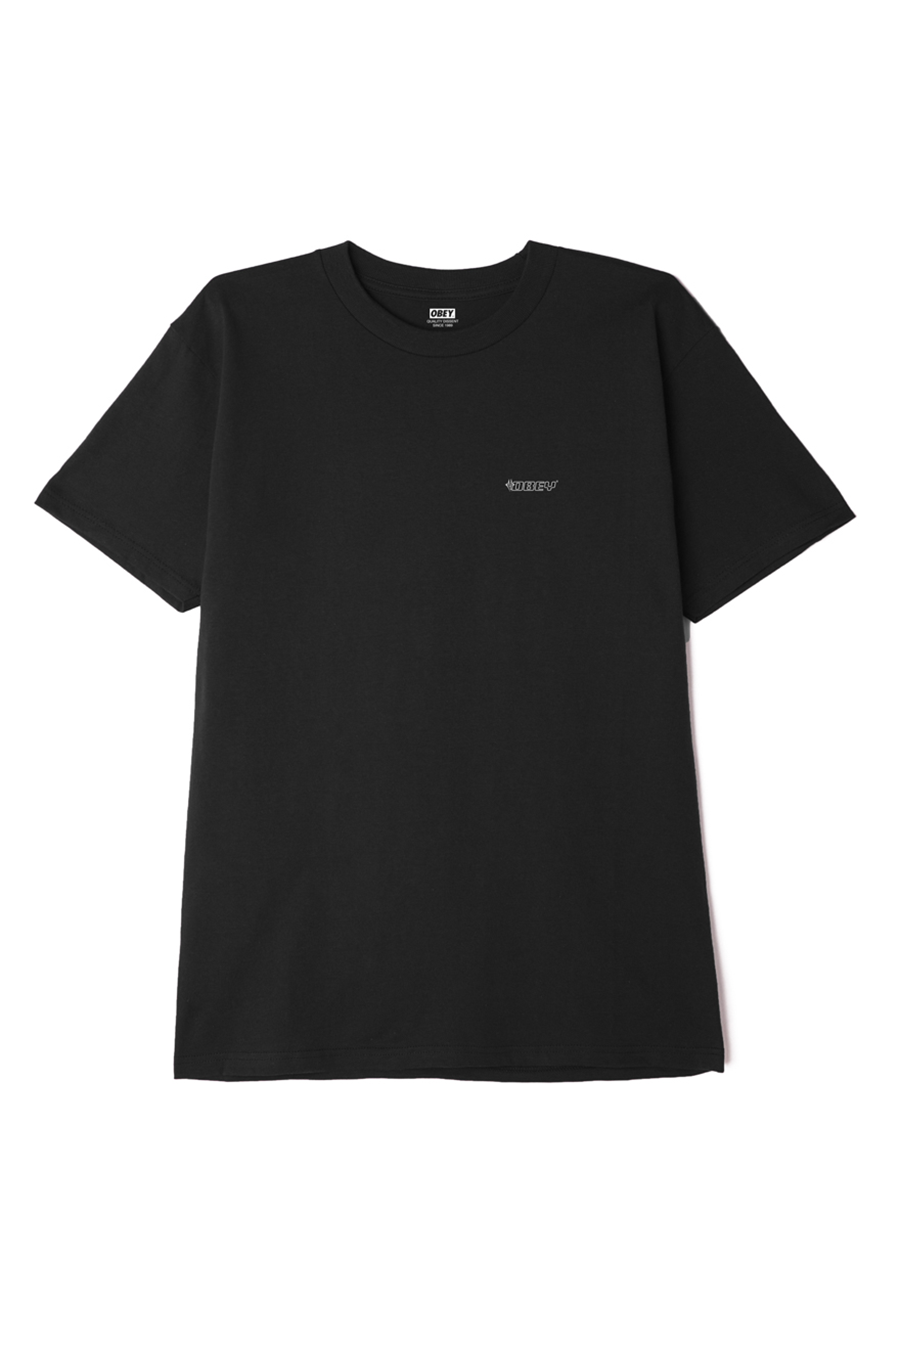 Transport Services Classic Tee | Black - Main Image Number 2 of 2